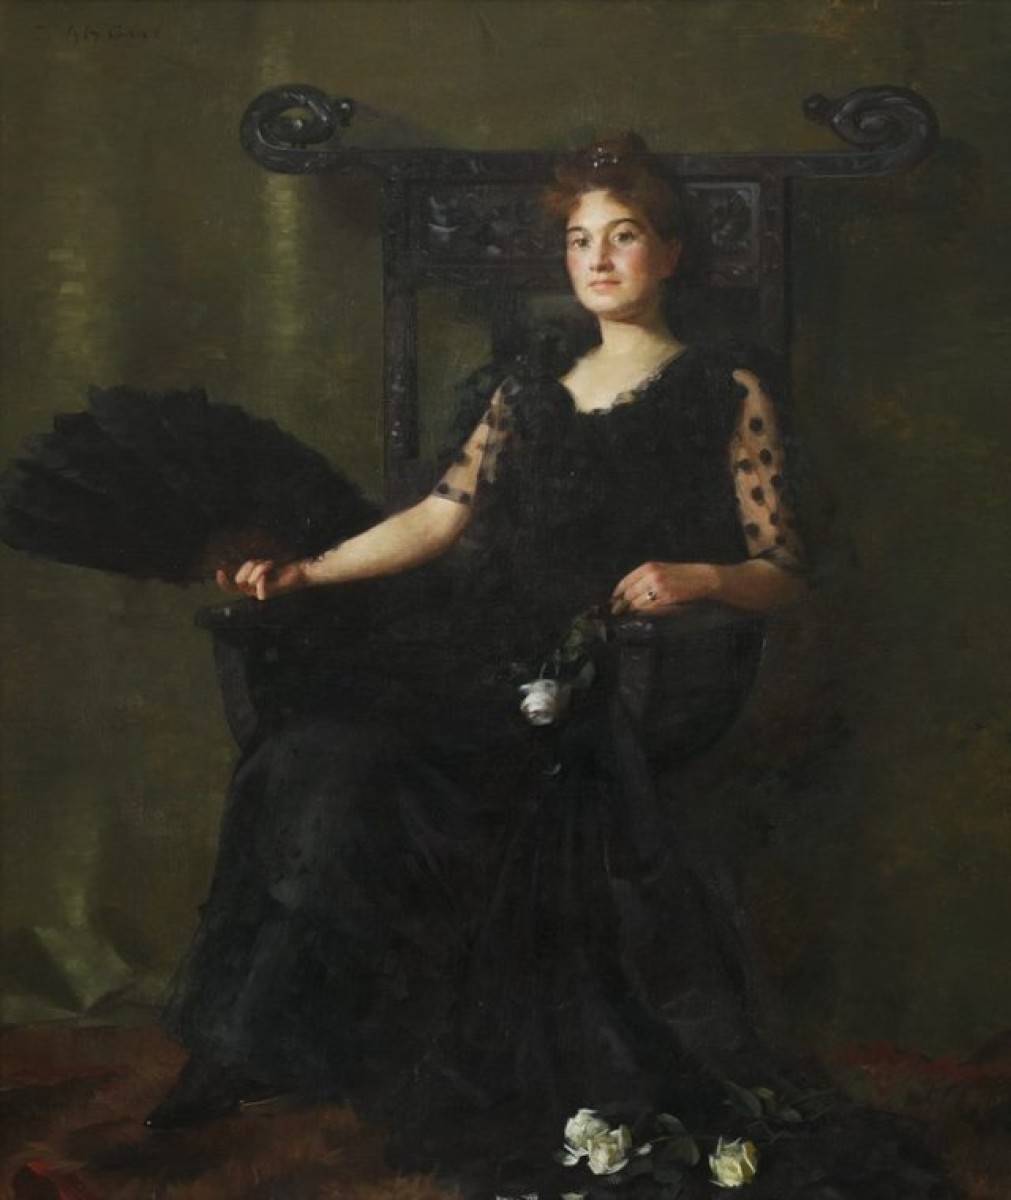 A women in a painting sitting